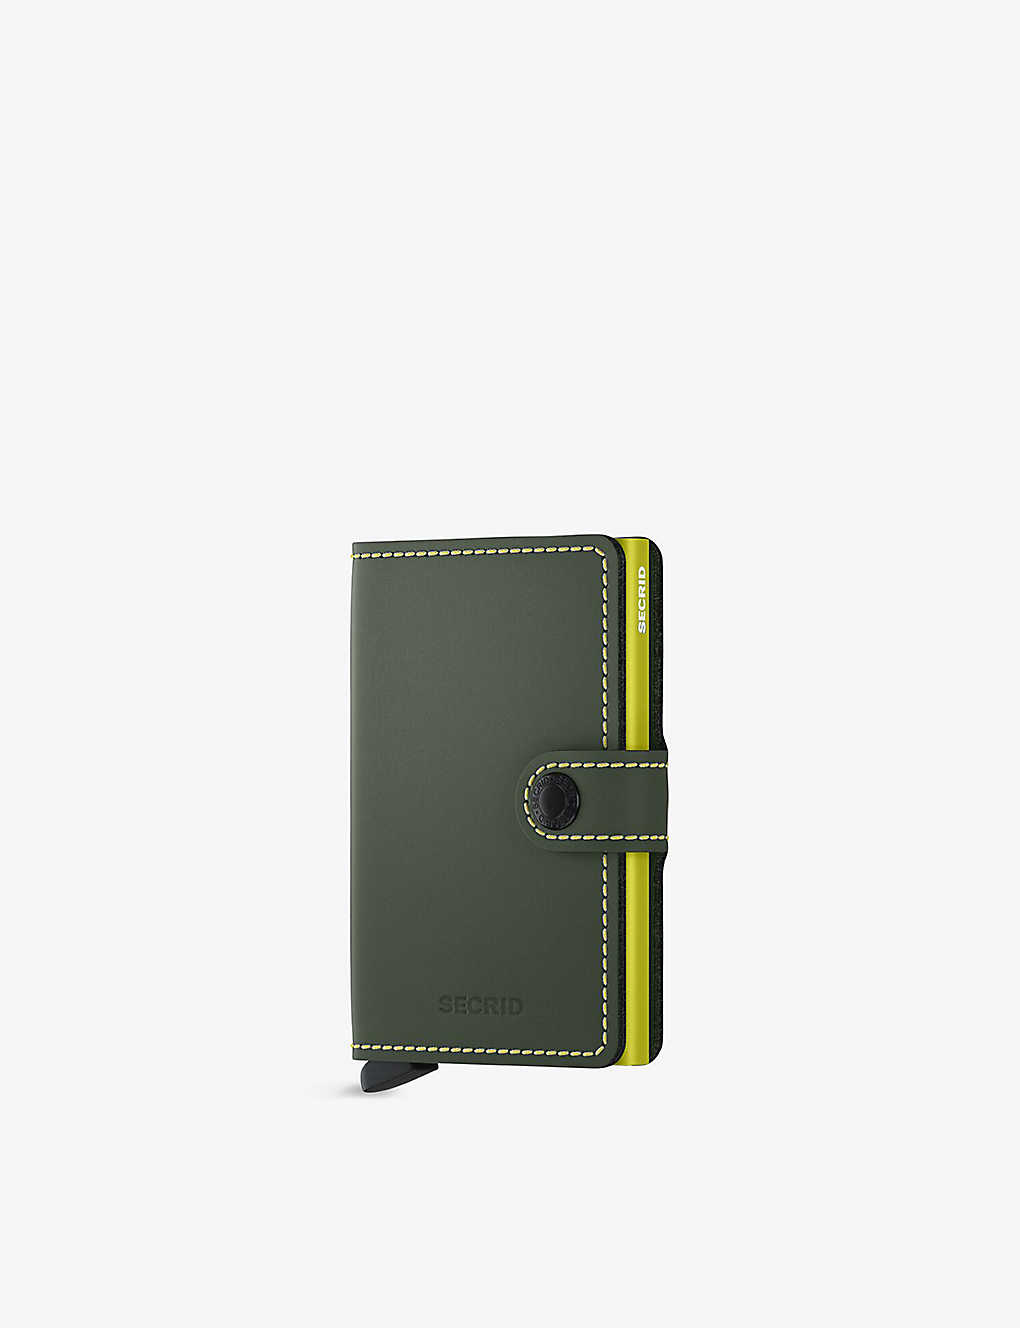 Secrid Miniwallet Leather And Aluminium Wallet In Mm-green & Lime